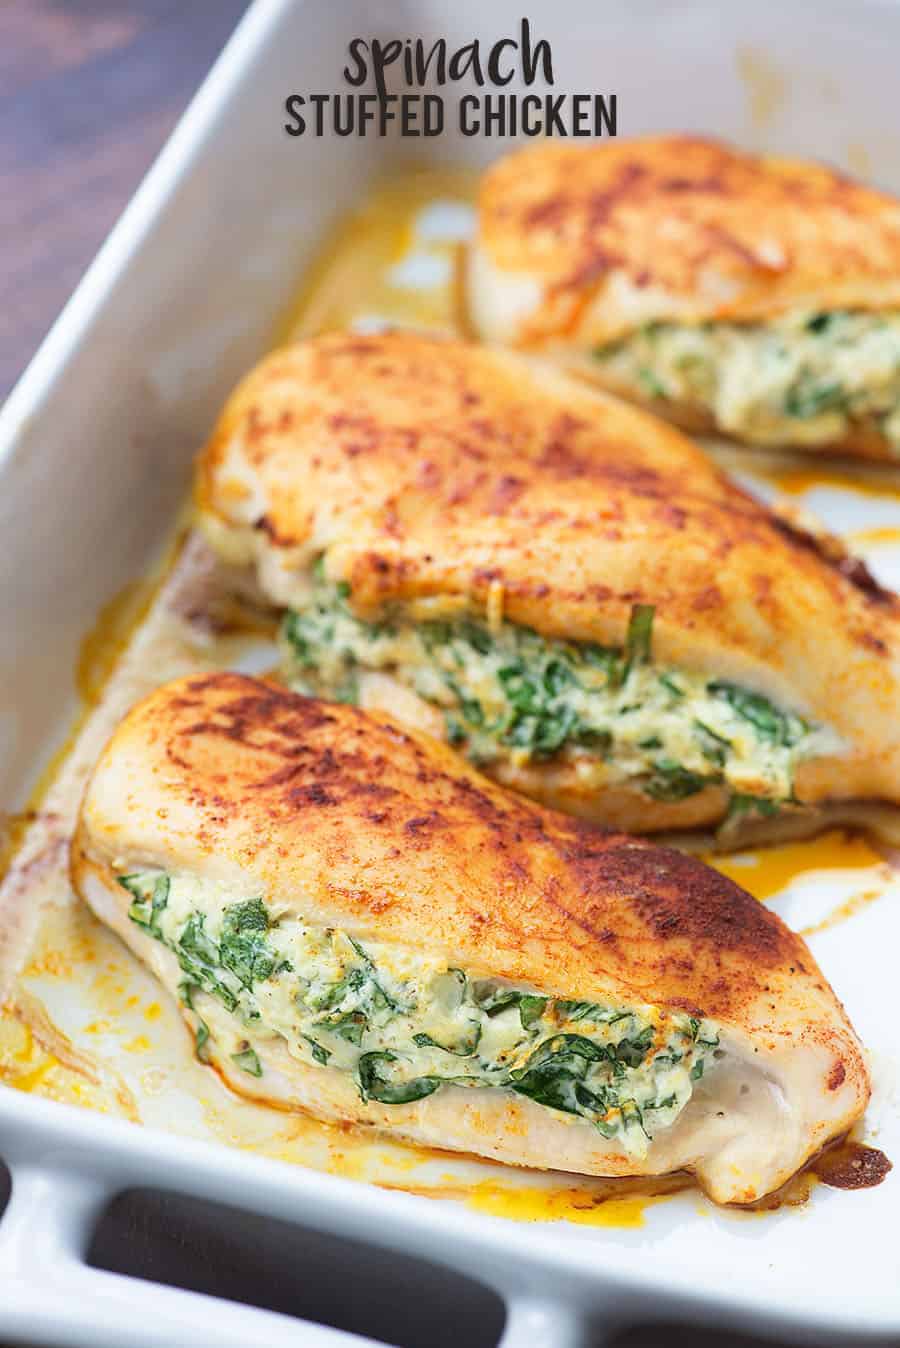 Spinach Stuffed Chicken Breasts A Healthy Low Carb Dinner Option,How To Grow Sweet Potatoes From Tubers